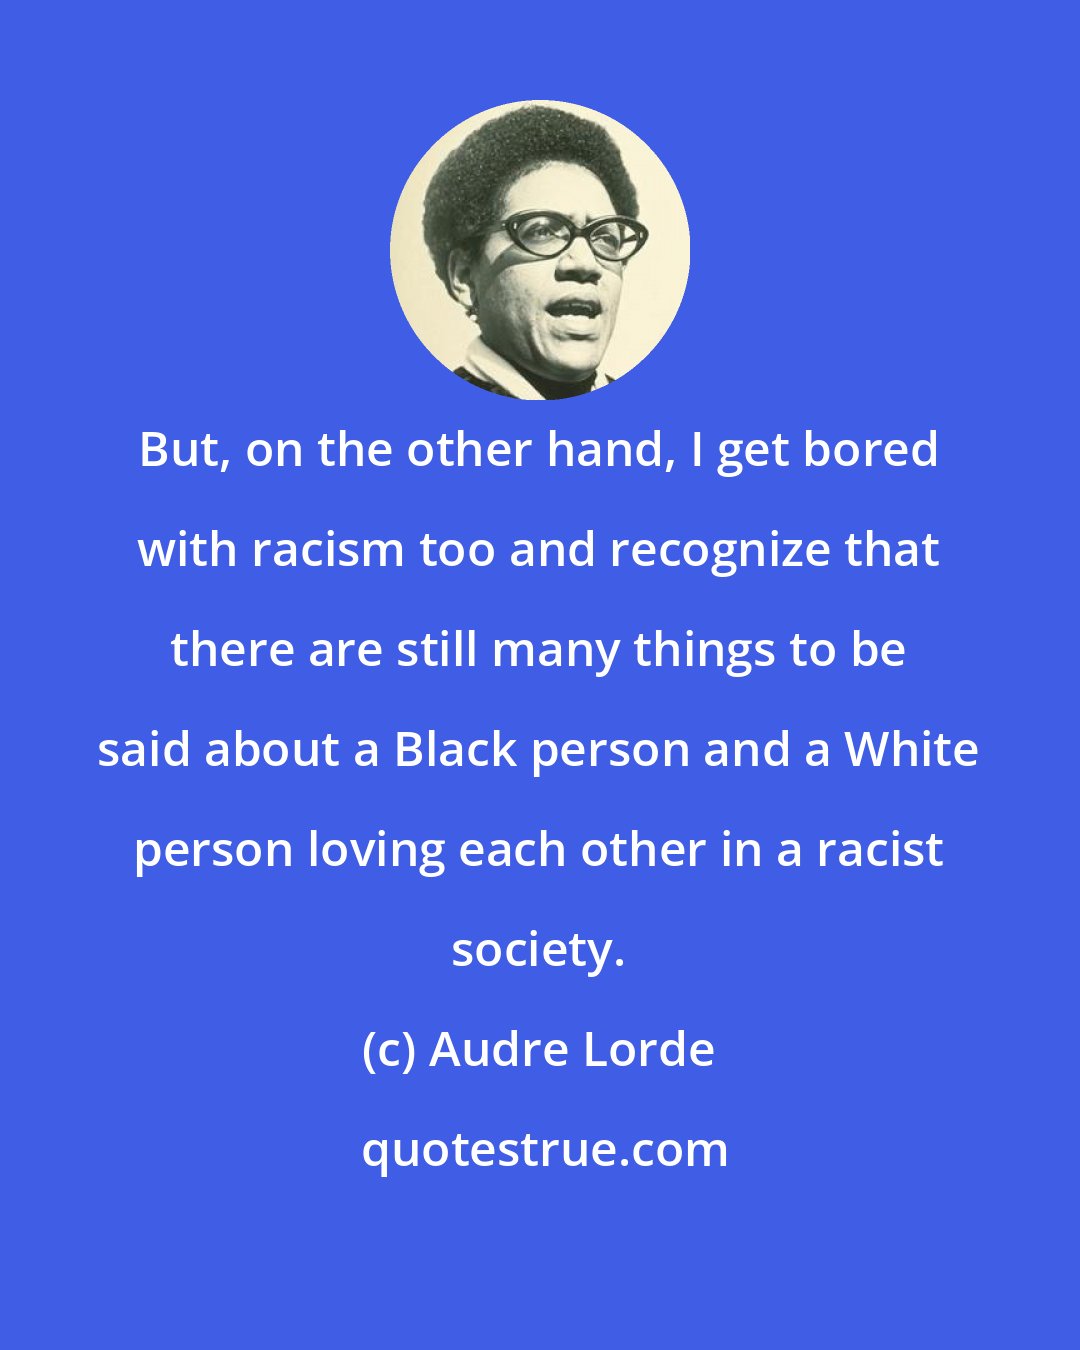 Audre Lorde: But, on the other hand, I get bored with racism too and recognize that there are still many things to be said about a Black person and a White person loving each other in a racist society.